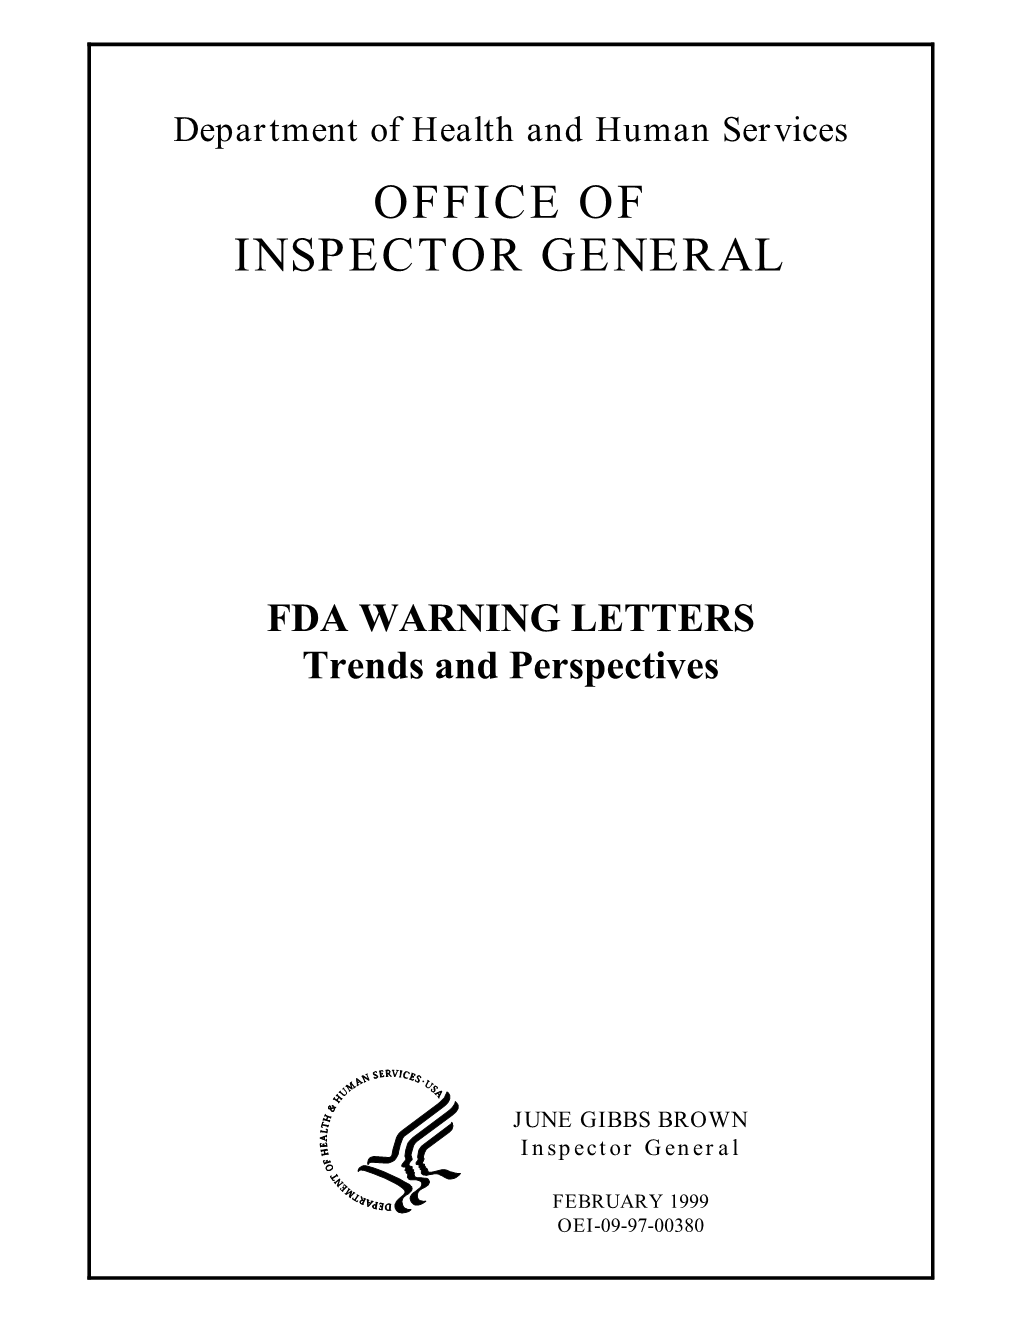 FDA Warning Letters: Trends and Perspectives (OEI-09-97-00380; 2/99)